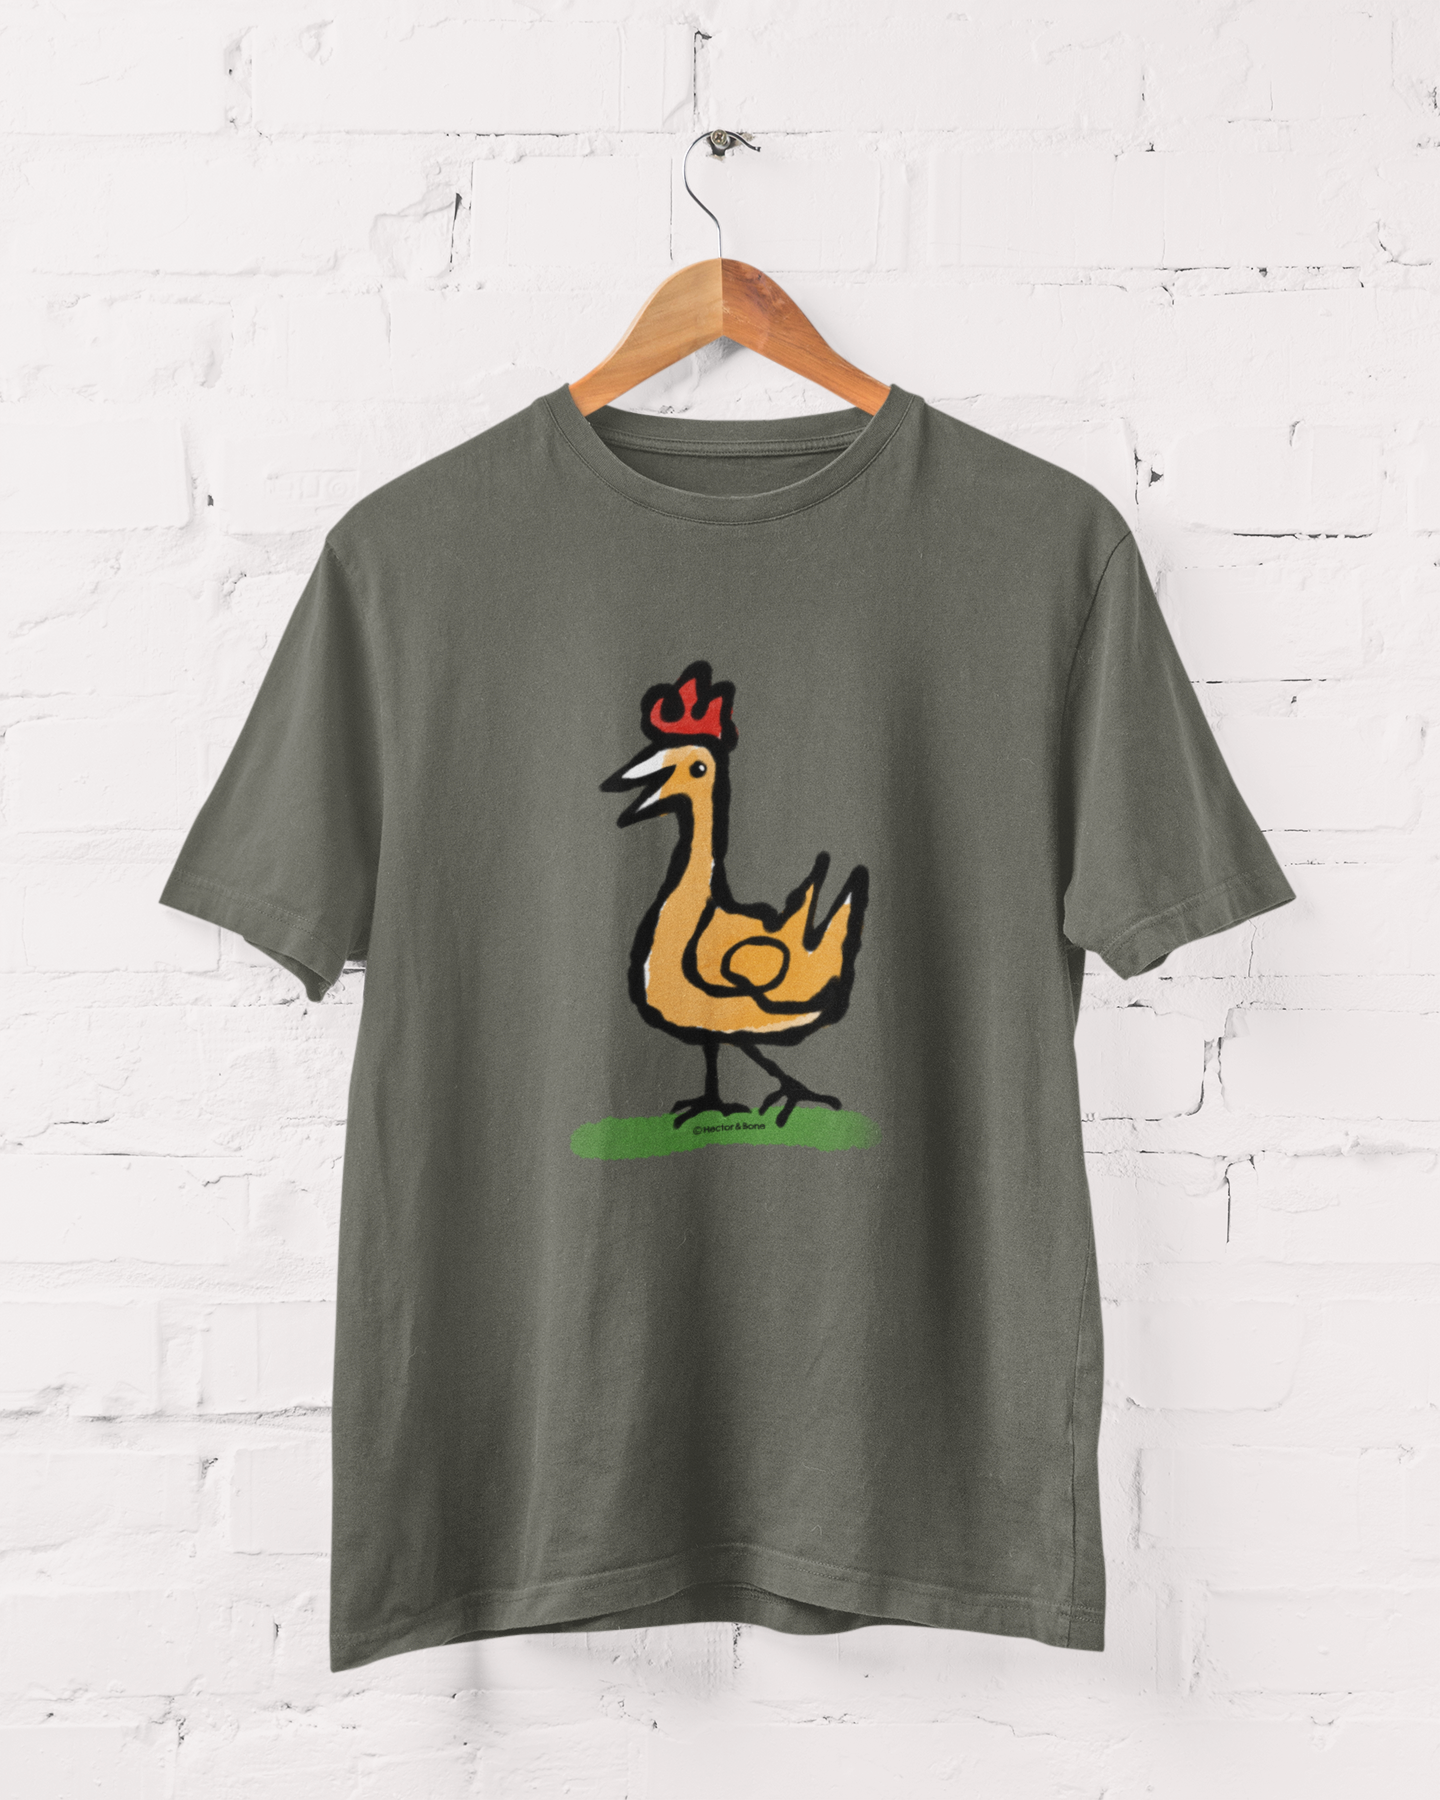 Happy Chicken T-shirt - Illustrated Funny Chicken design on khaki colour vegan t-shirts by Hector and Bone